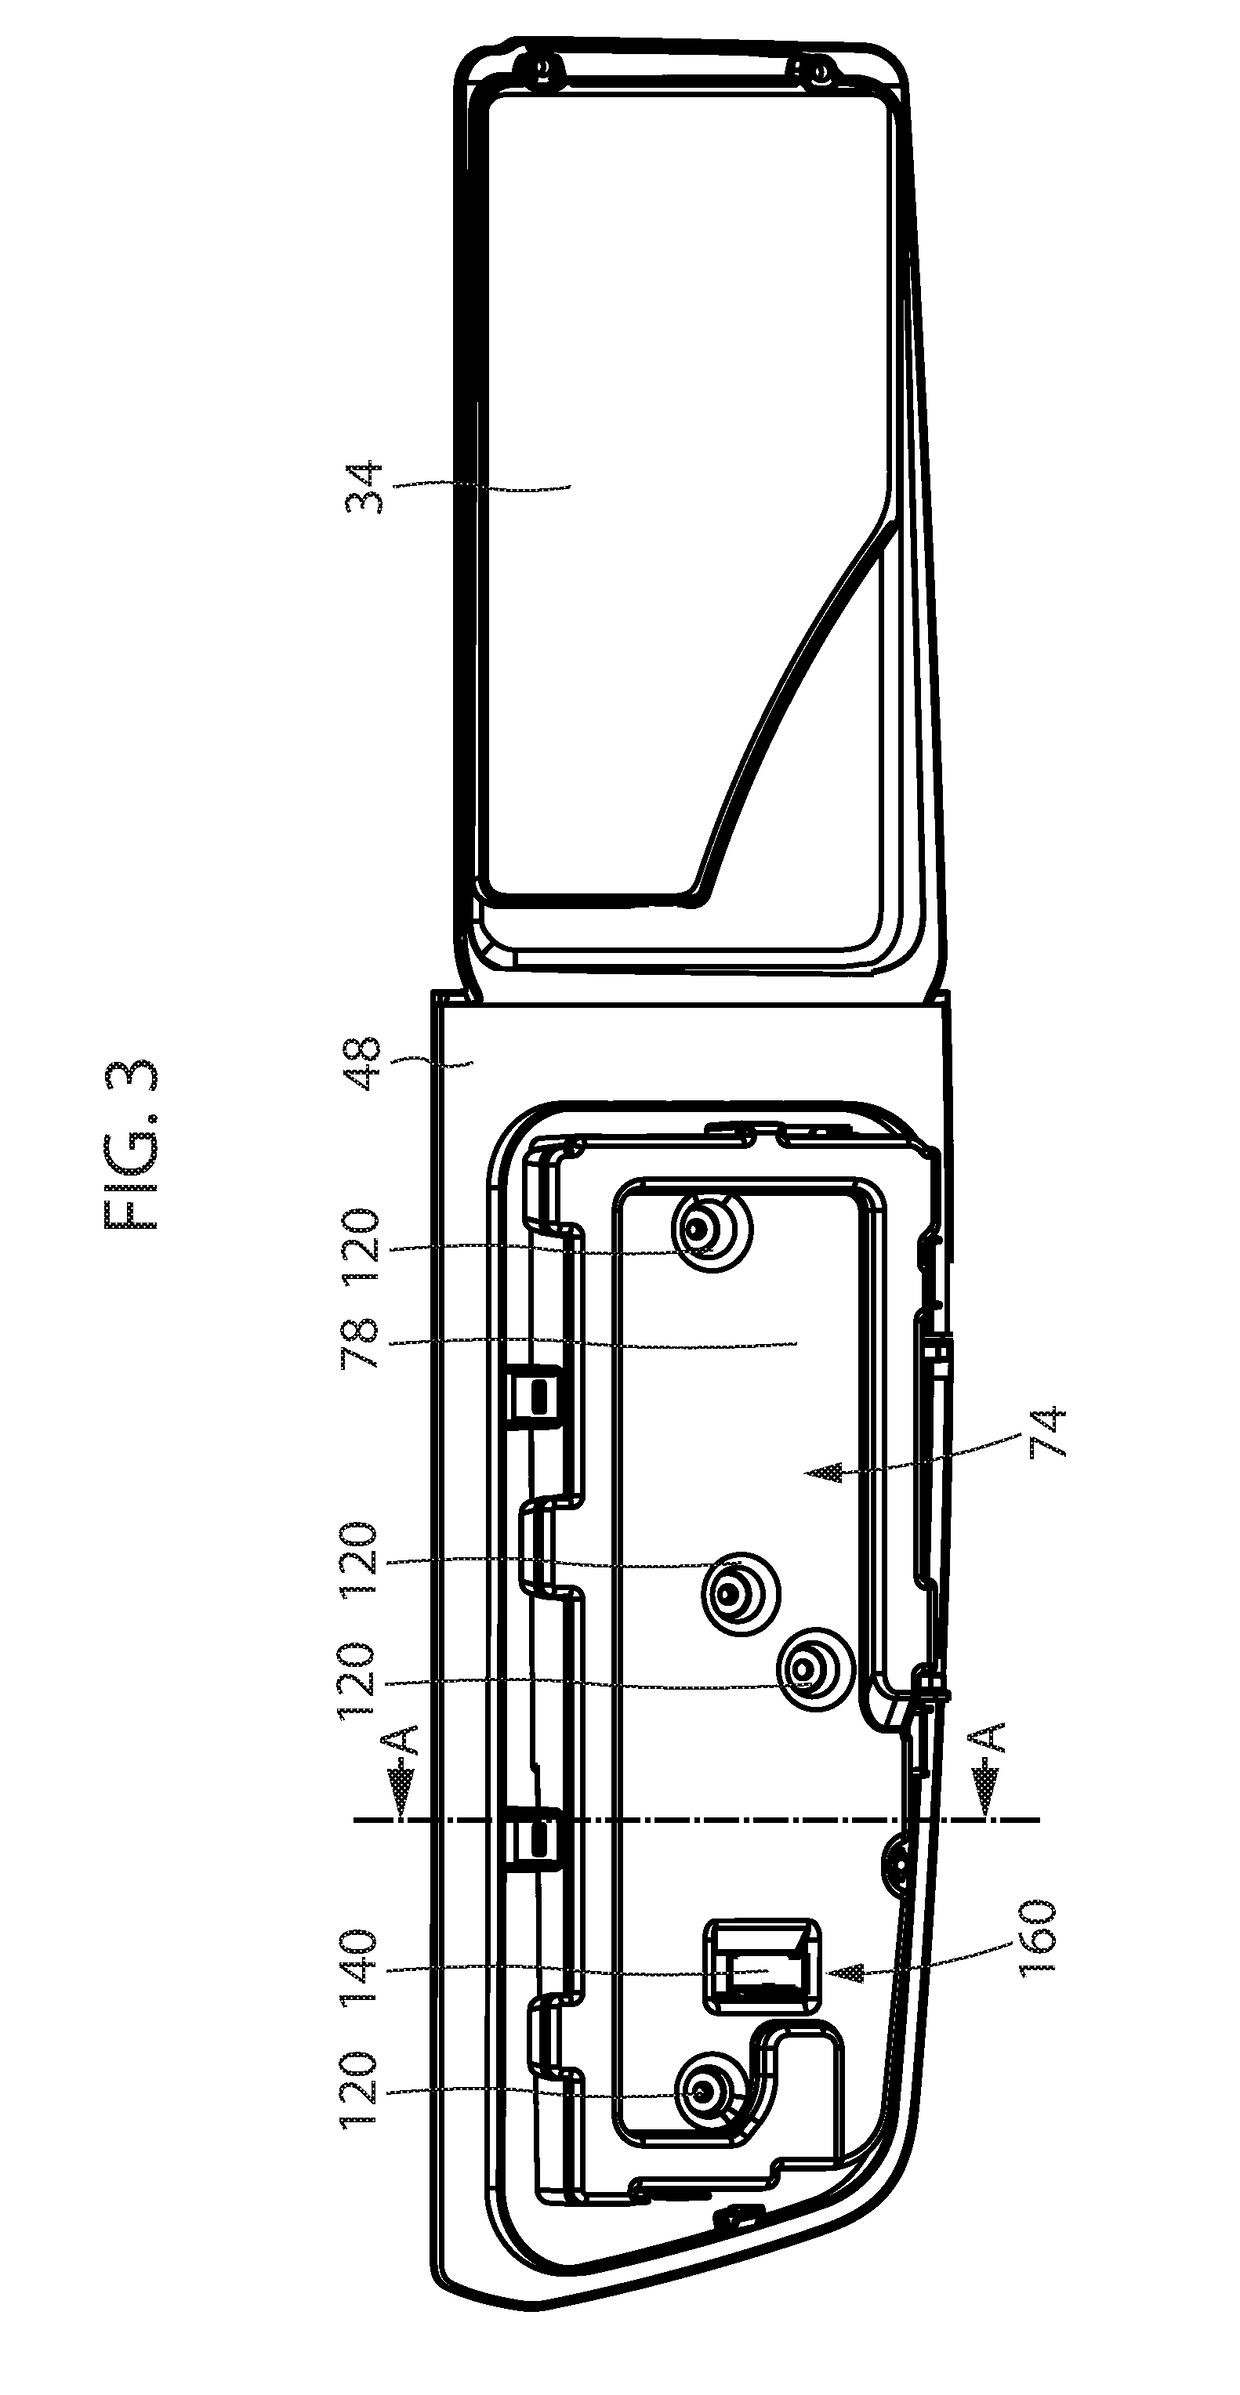 Household appliance with an electronic board and method for manufactruing a household appliance